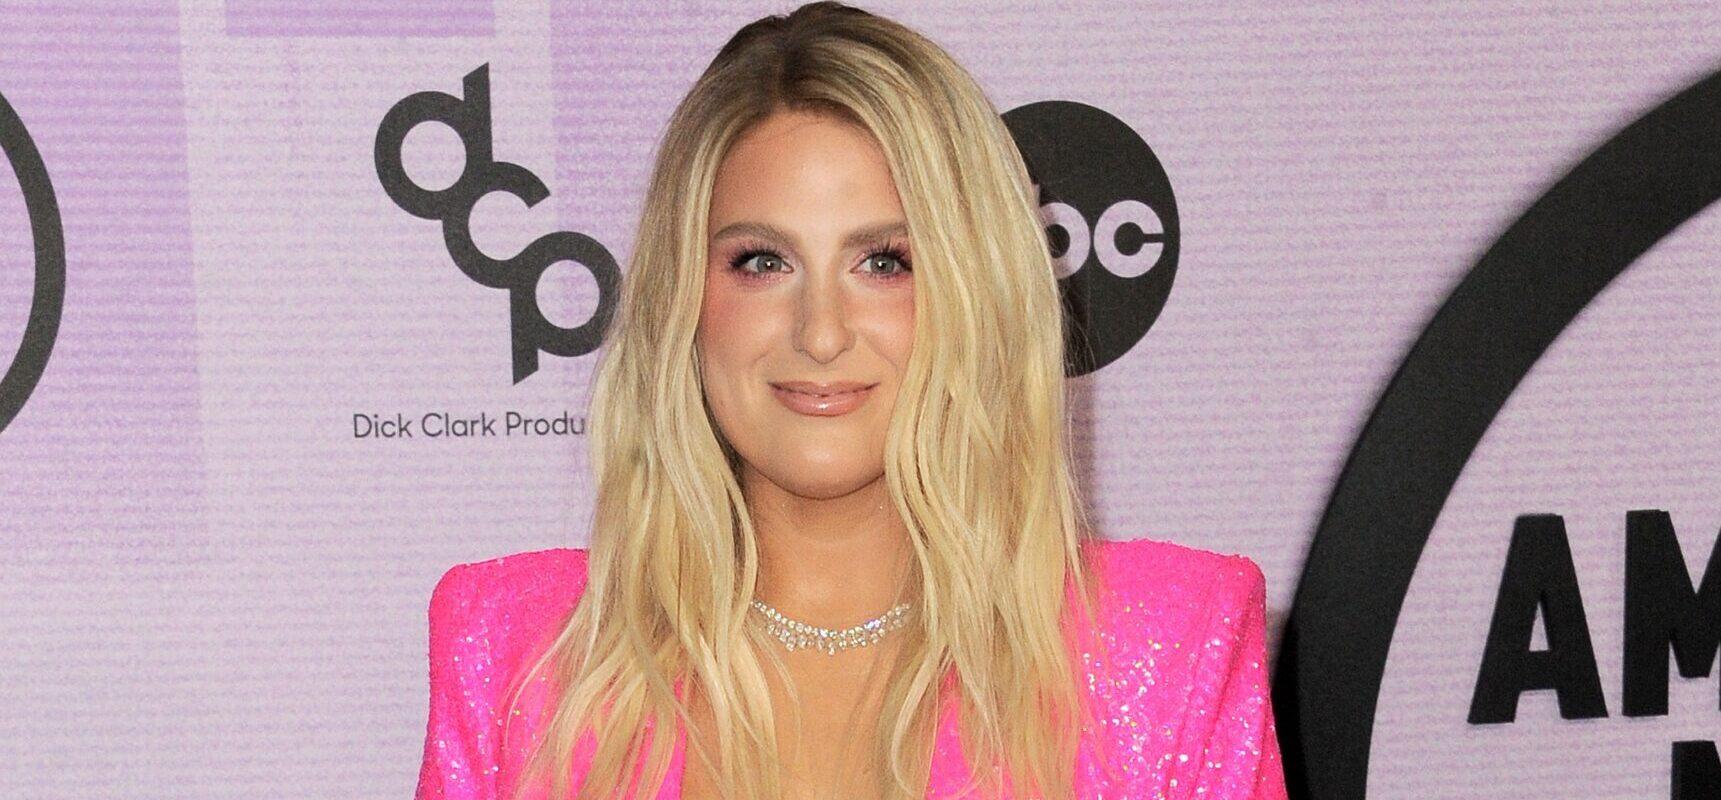 Meghan Trainor’s Book ‘Dear Future Mama’ Is About To Be Released!